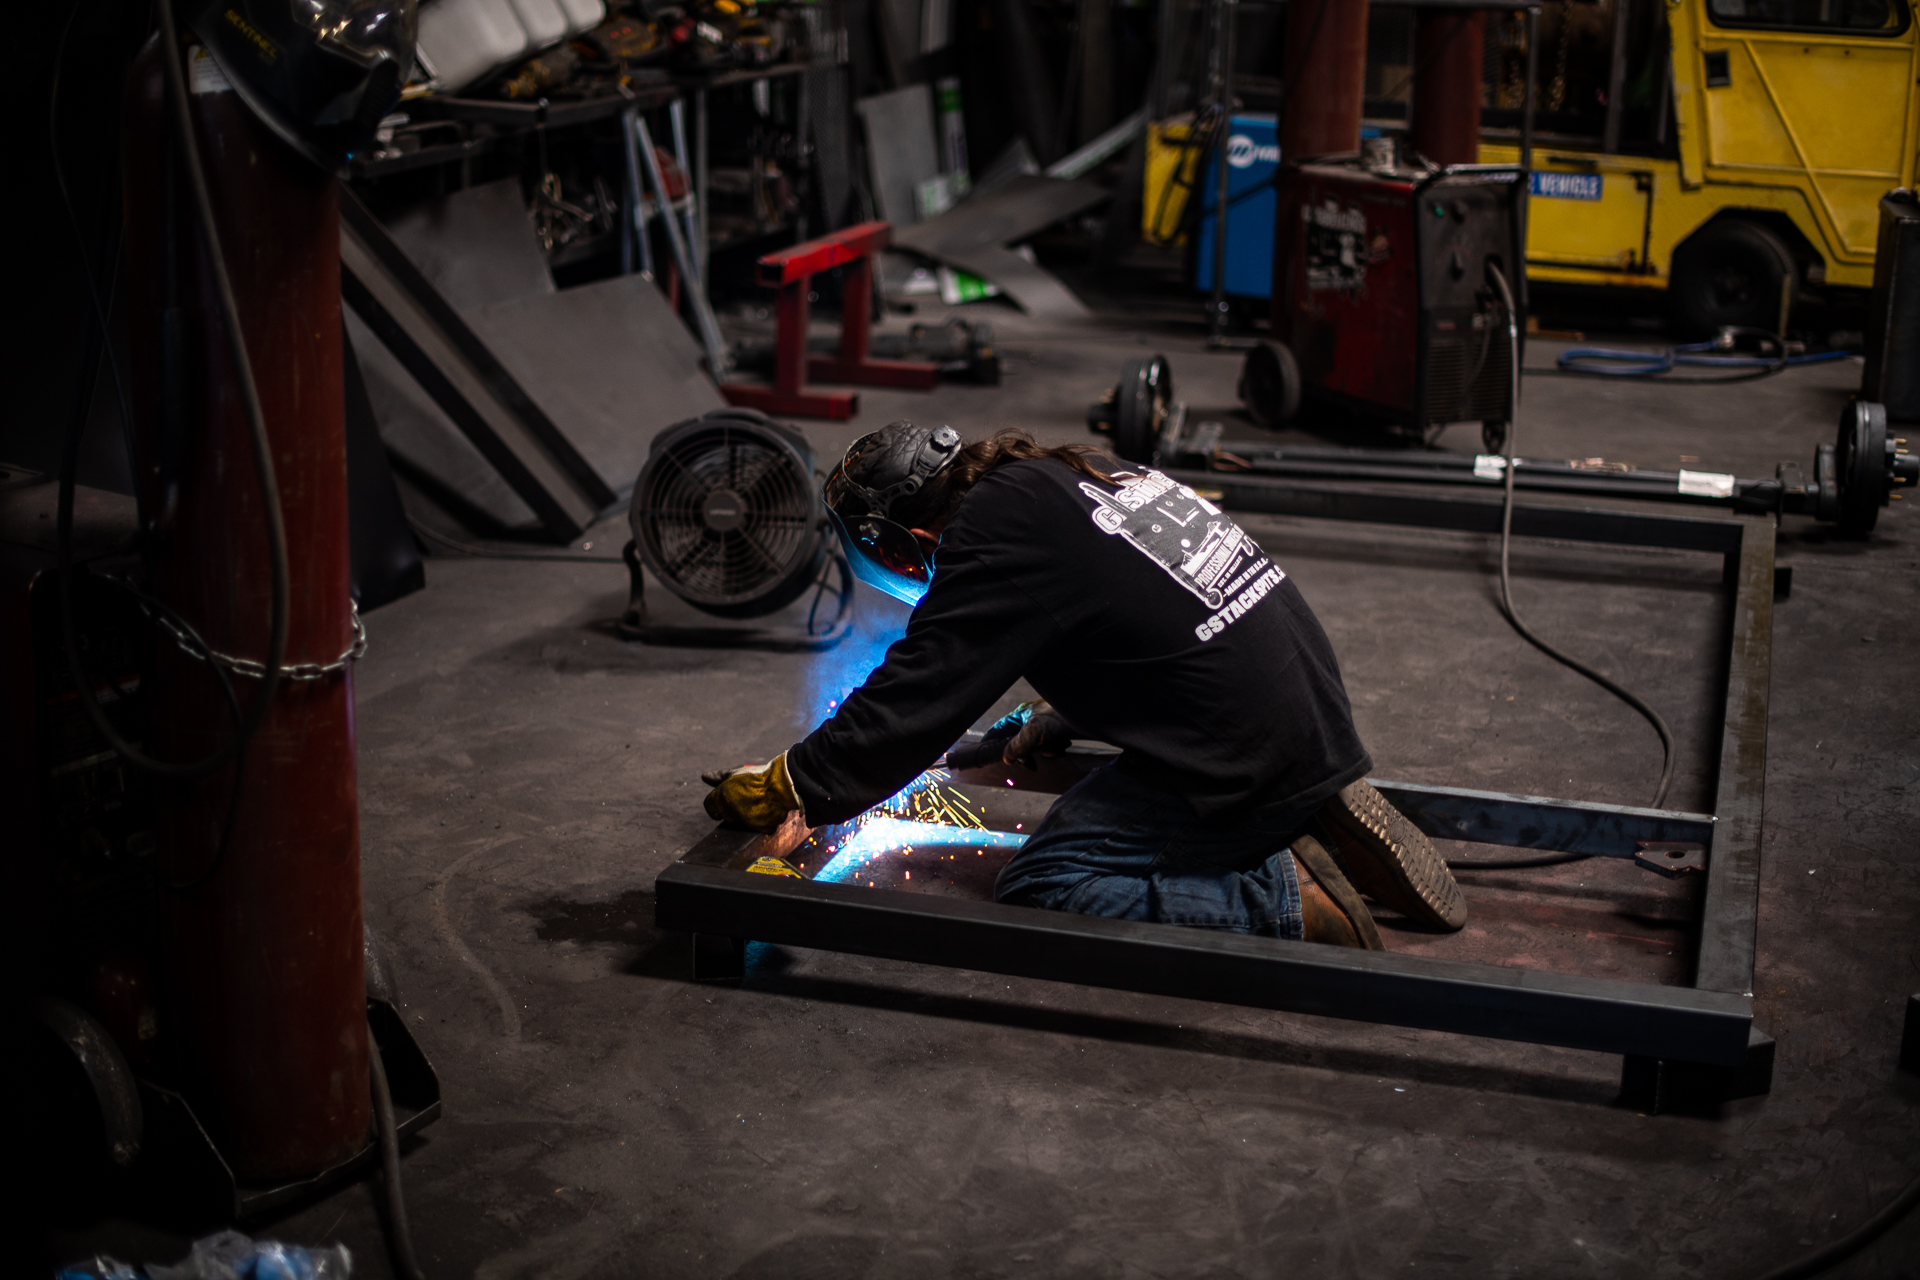 A man kneels on the ground welding something, as blue sparks fly.